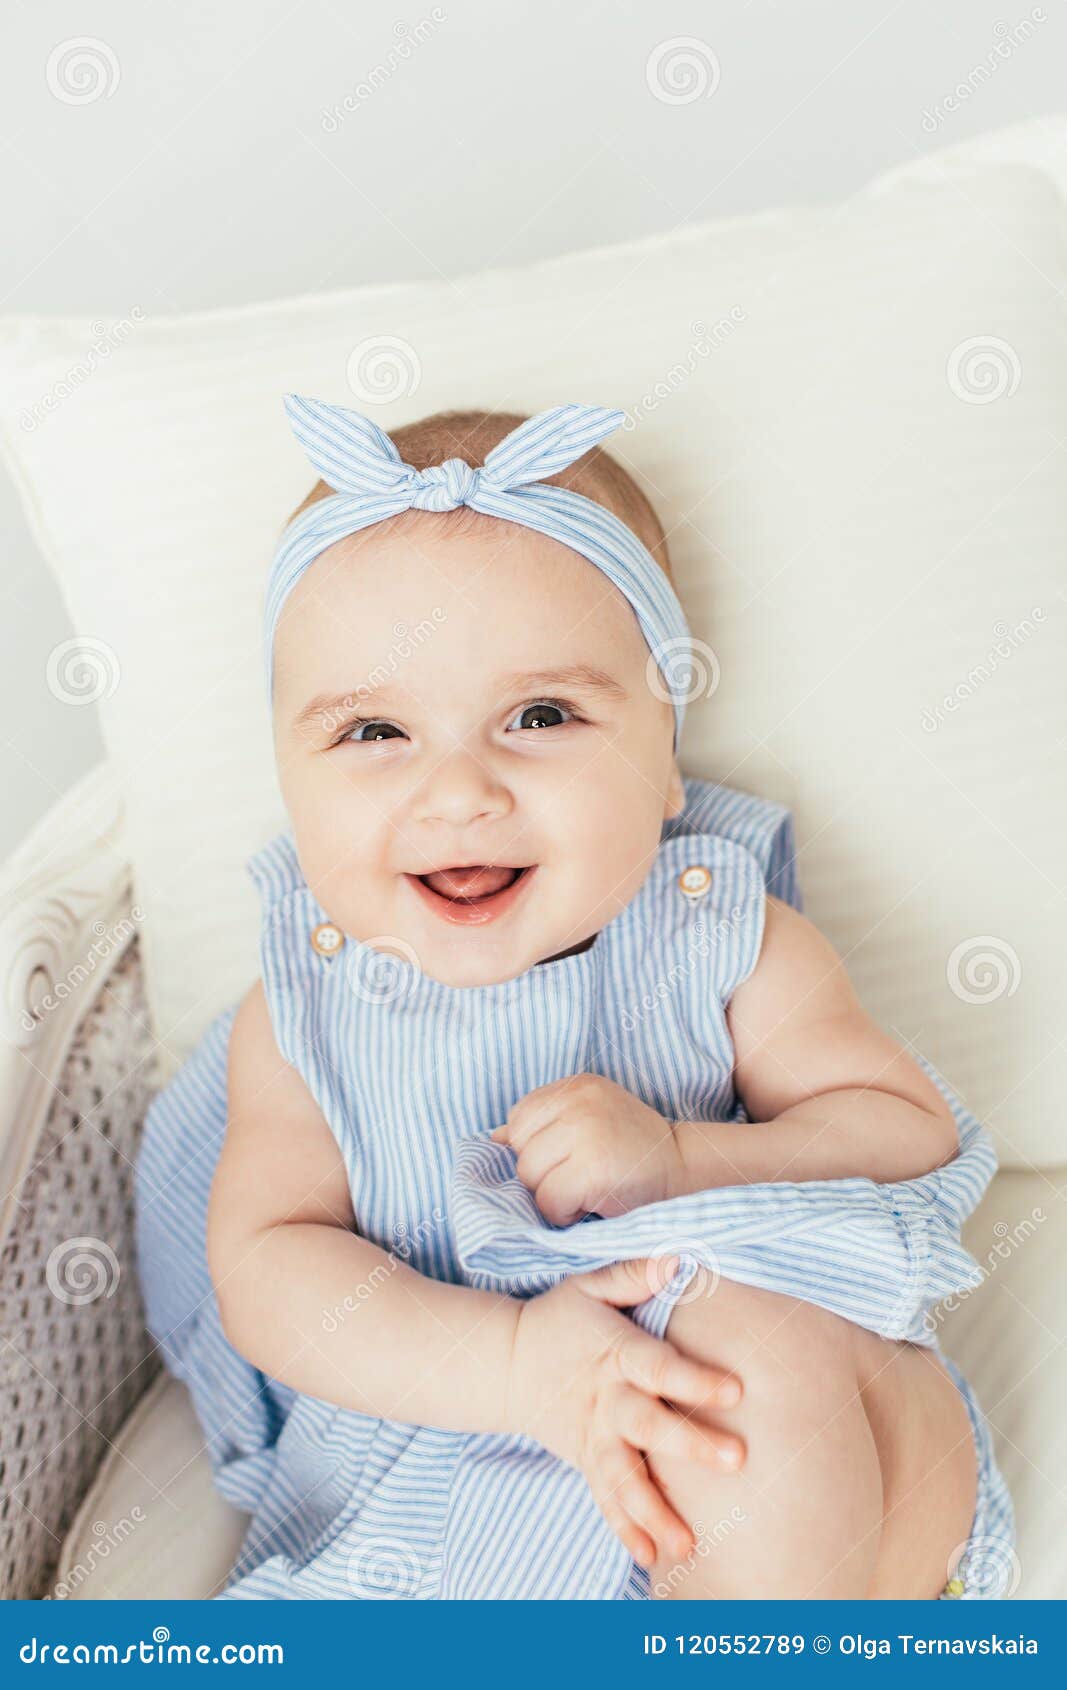 Cute Smiling Baby Girl on White Studio Backgroung. 6 Months Baby ...